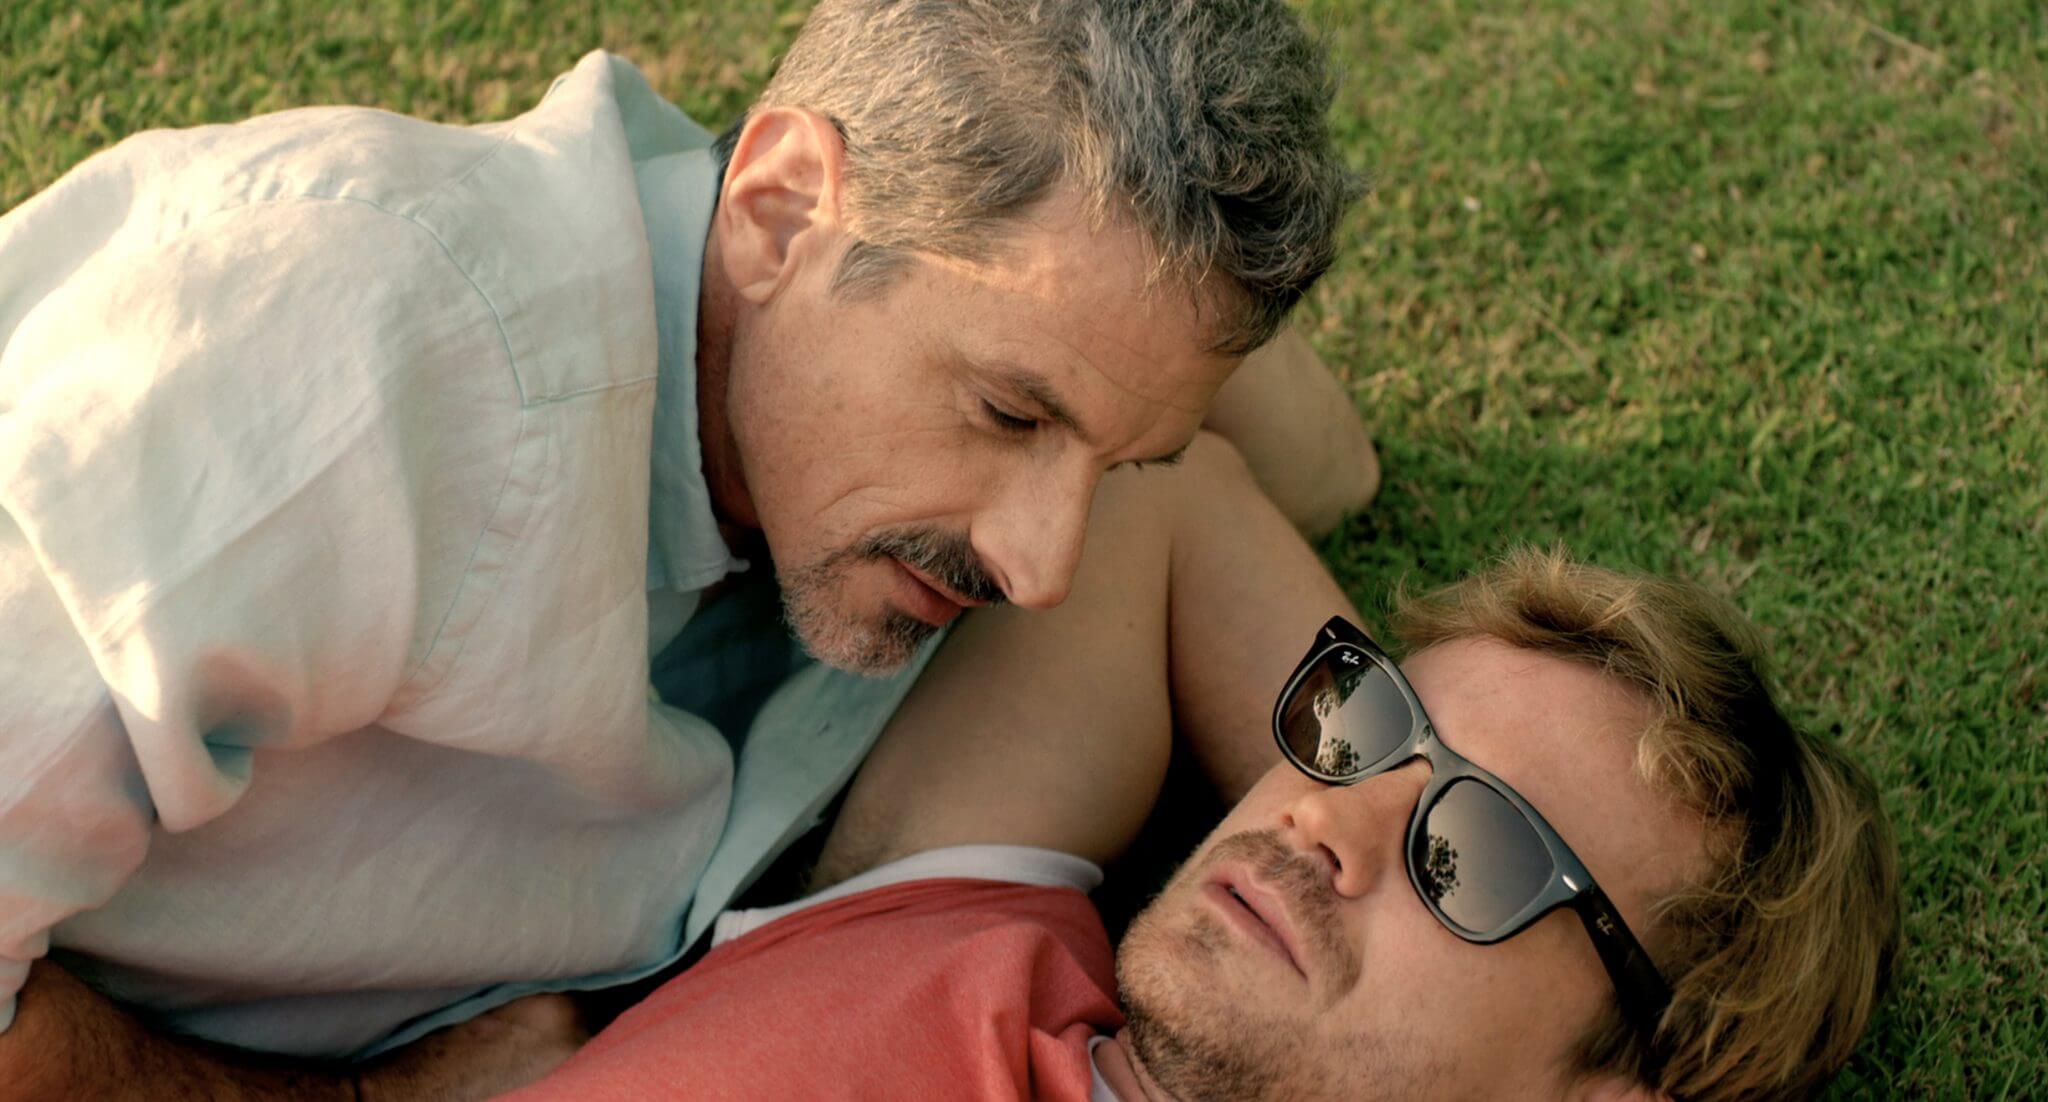 Nobody’s Watching, dall’Argentina a New York in cerca di fortuna - Nobodys watching 2 - Gay.it